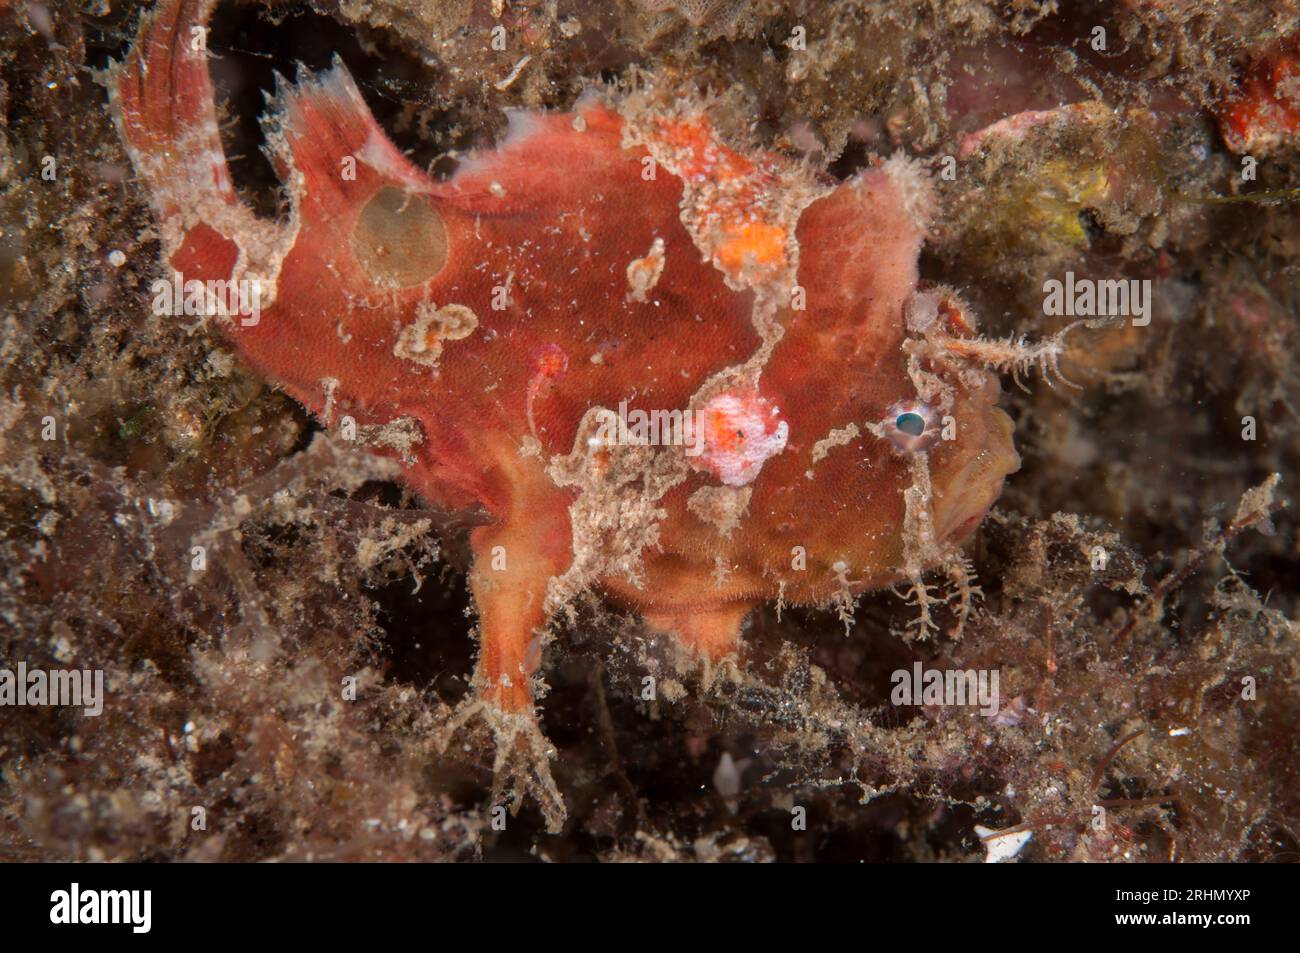 White-finger Frogfish, Antennarius nummifer, with extended lure, Slow Poke dive site, Lembeh Straits, Sulawesi, Indonesia Stock Photo